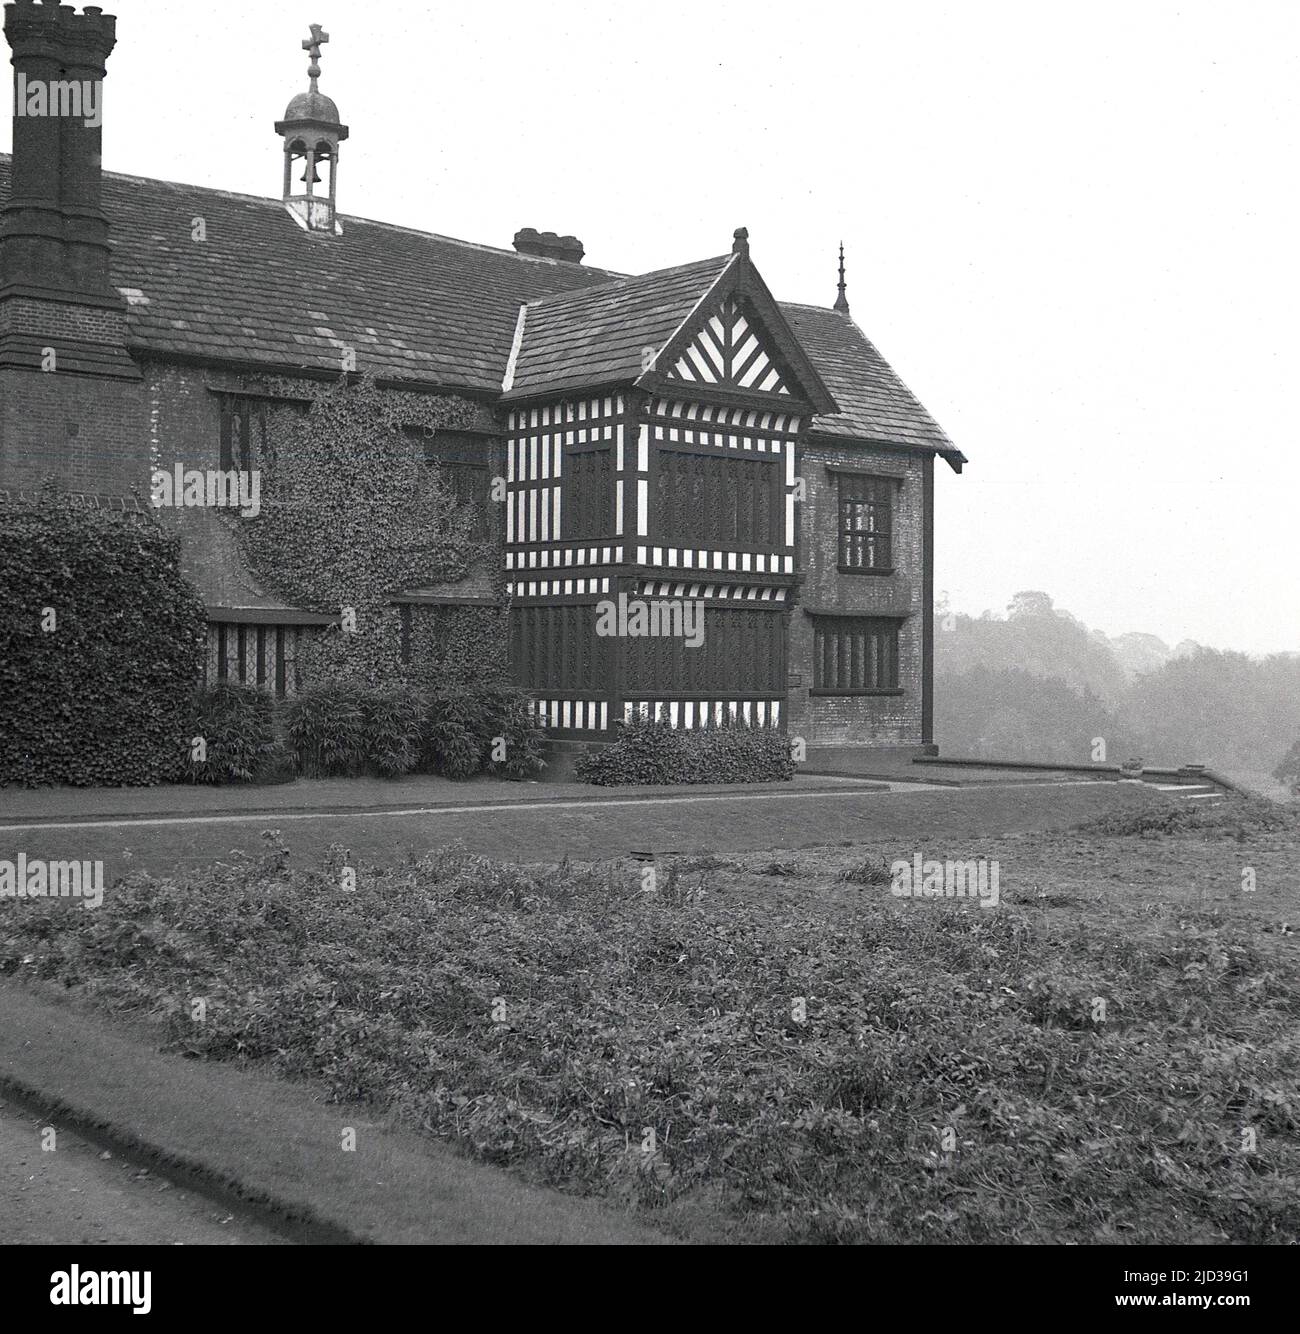 1940s, historical, the rear of Bramall Hall, Stockport, England, UK. A timber-framed Tudor manor house that dates back to the 14th century, with later additions, the house and surrounding parkland was acquired by the local authority in 1935 and became a museum. The Davenport family, which it is believed built the house, held the manor for over 500 years. Stock Photo